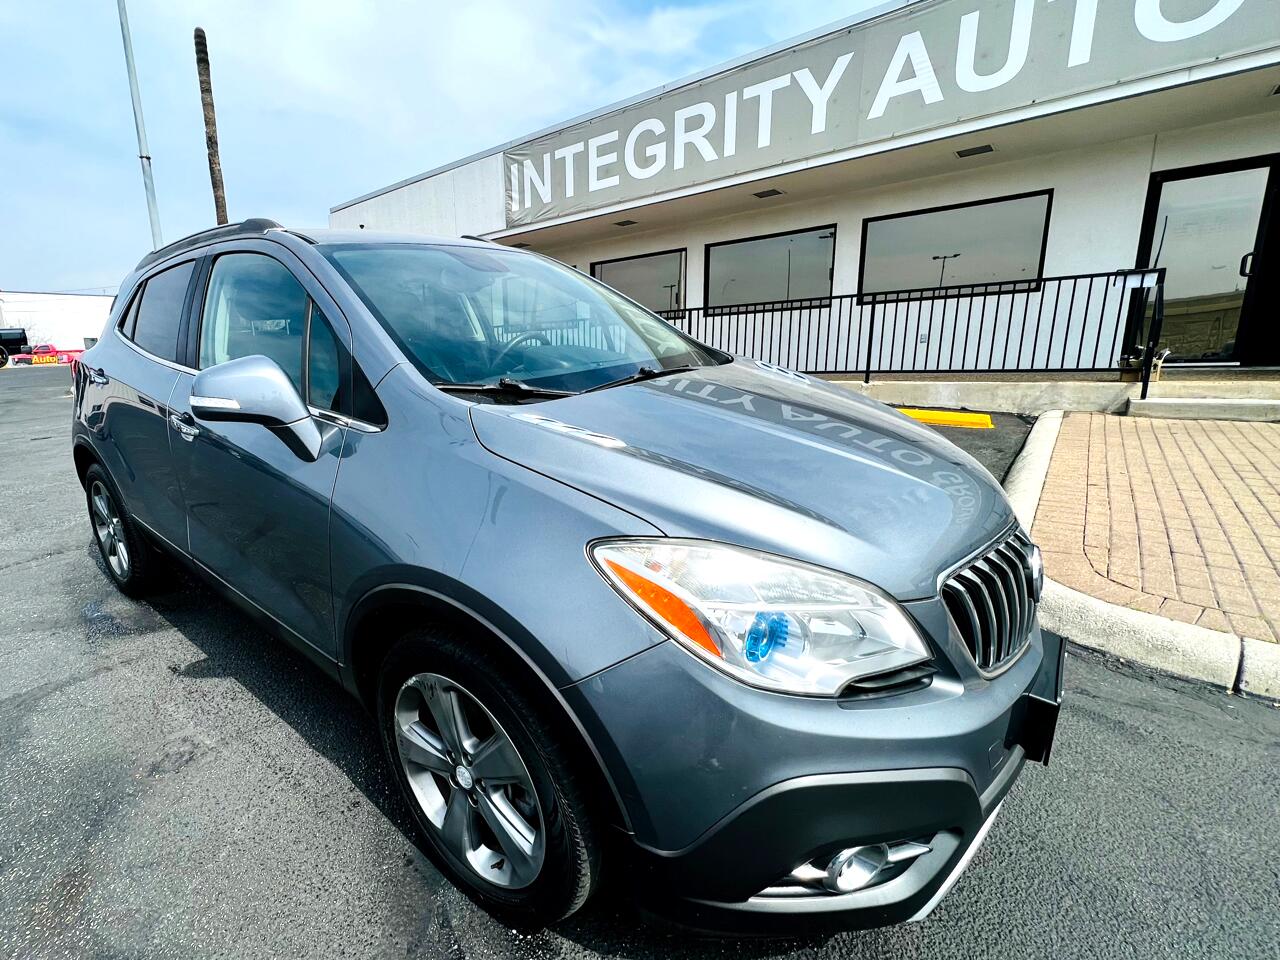 2014 Buick Encore FWD 4dr Leather